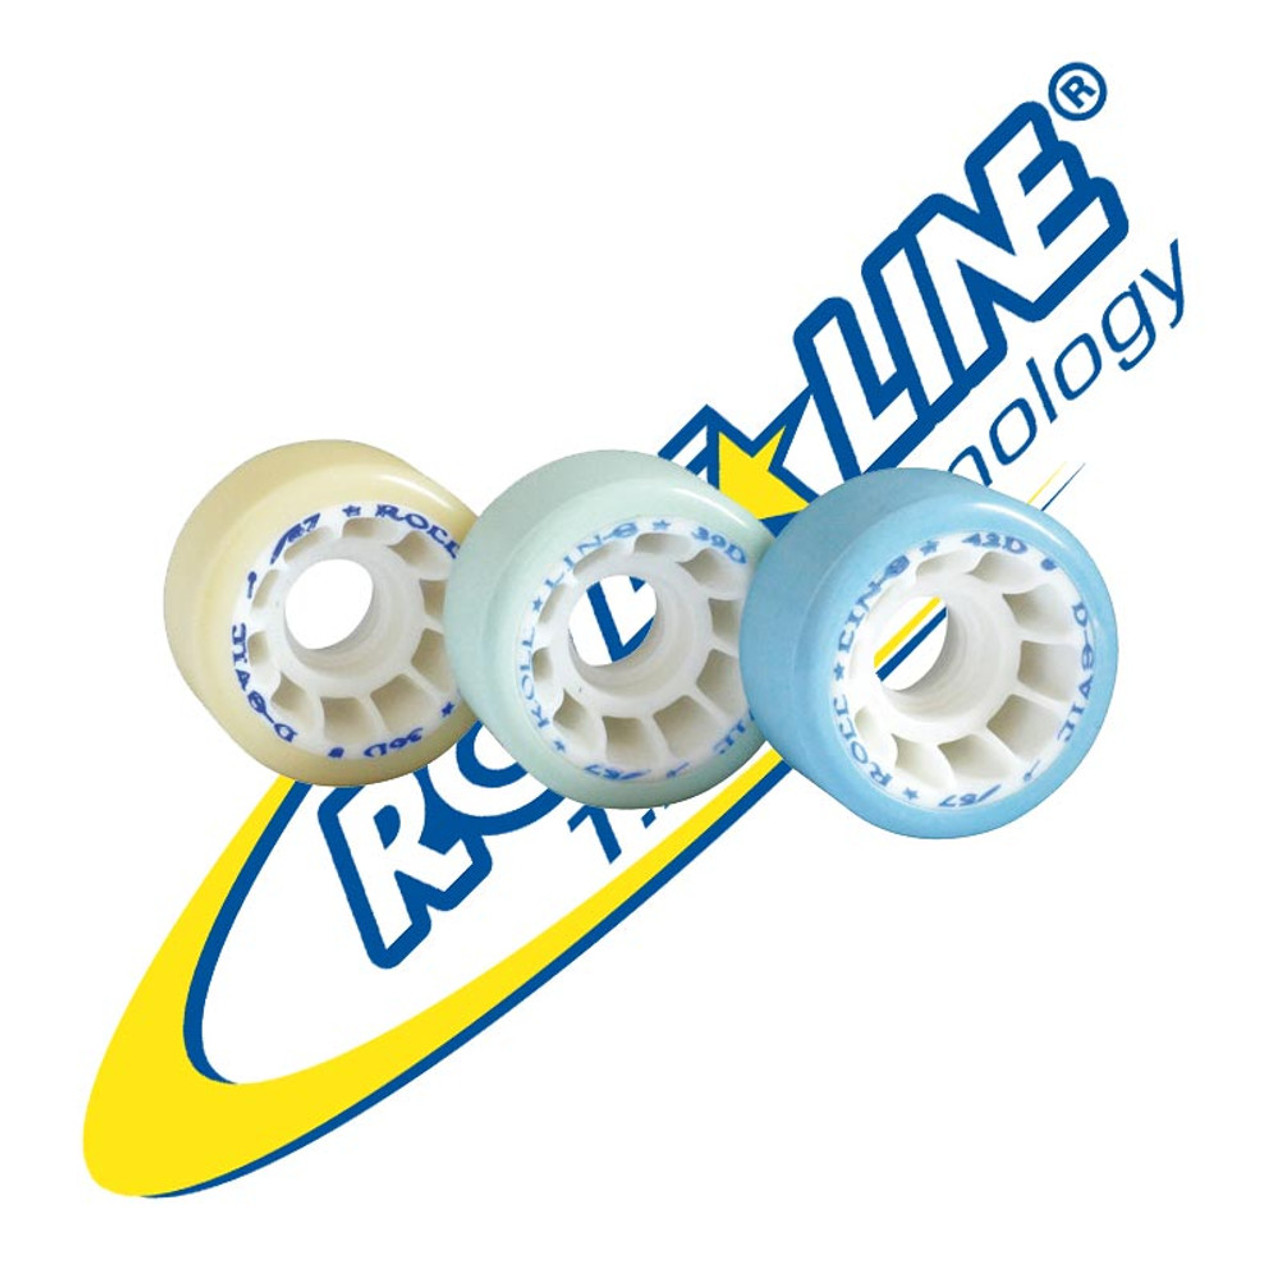 Roues Roller Derby Roll-Line Formula 88A